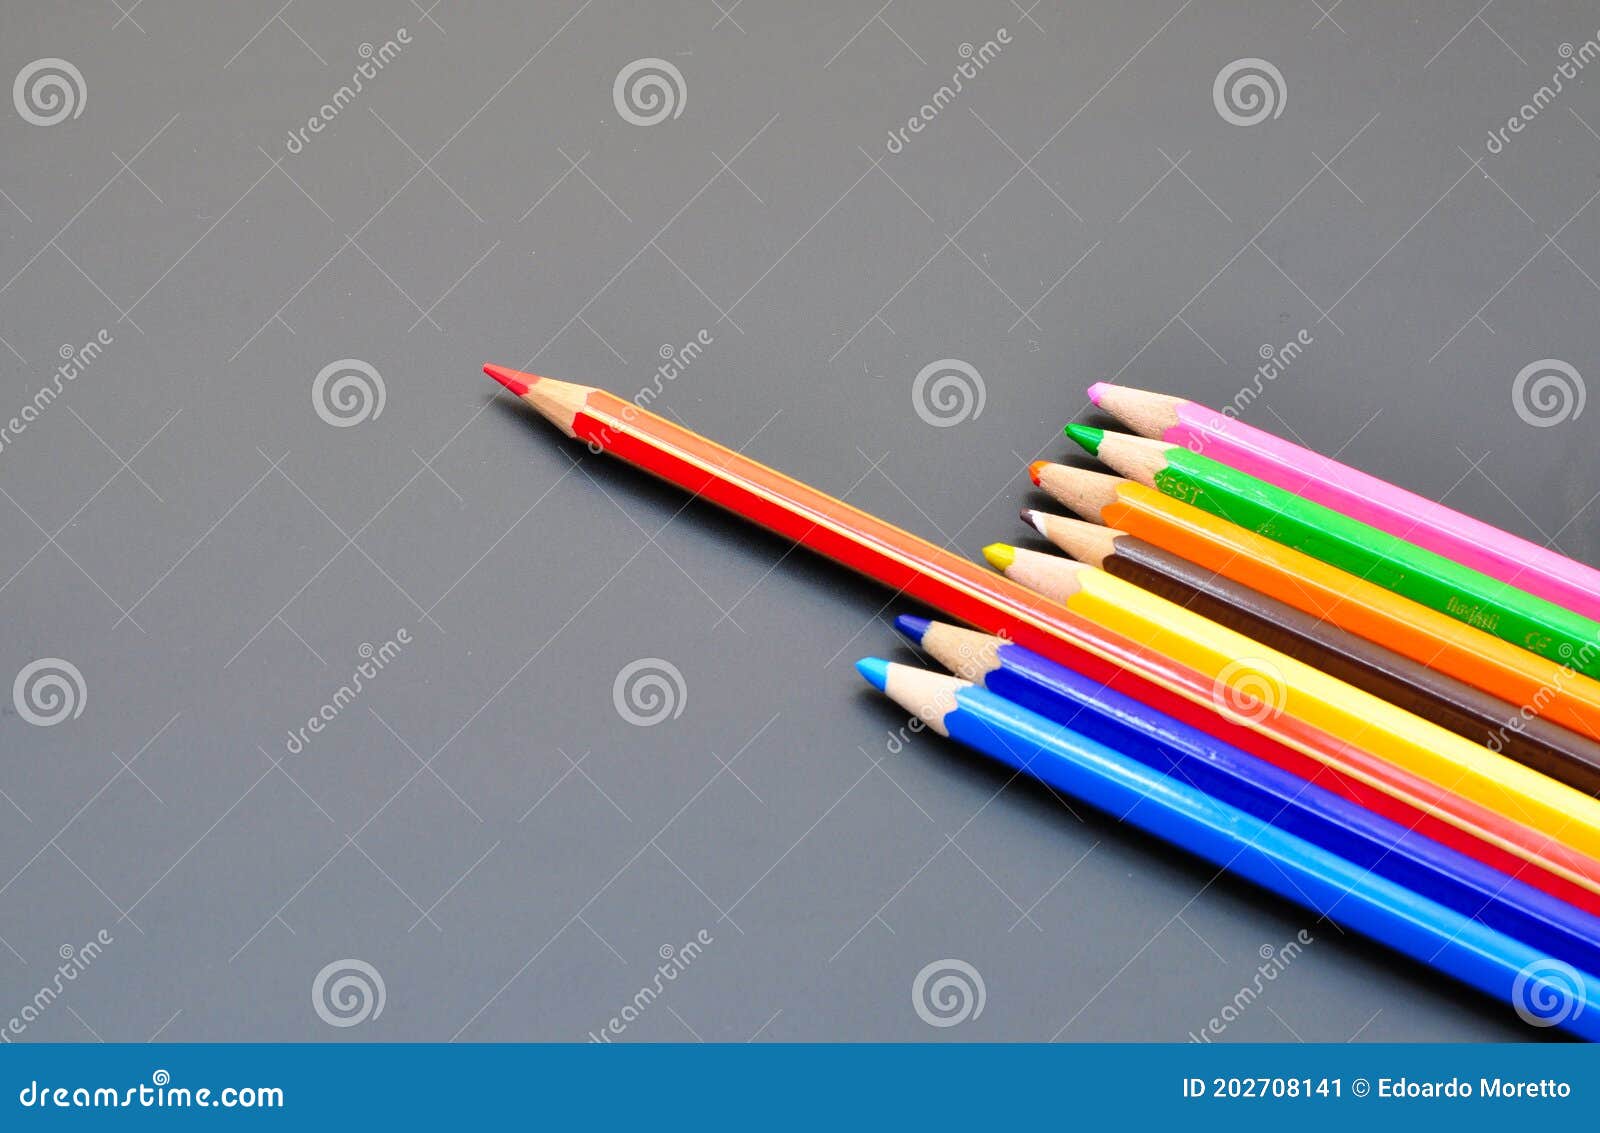 leadership makes differences shown by color pencils